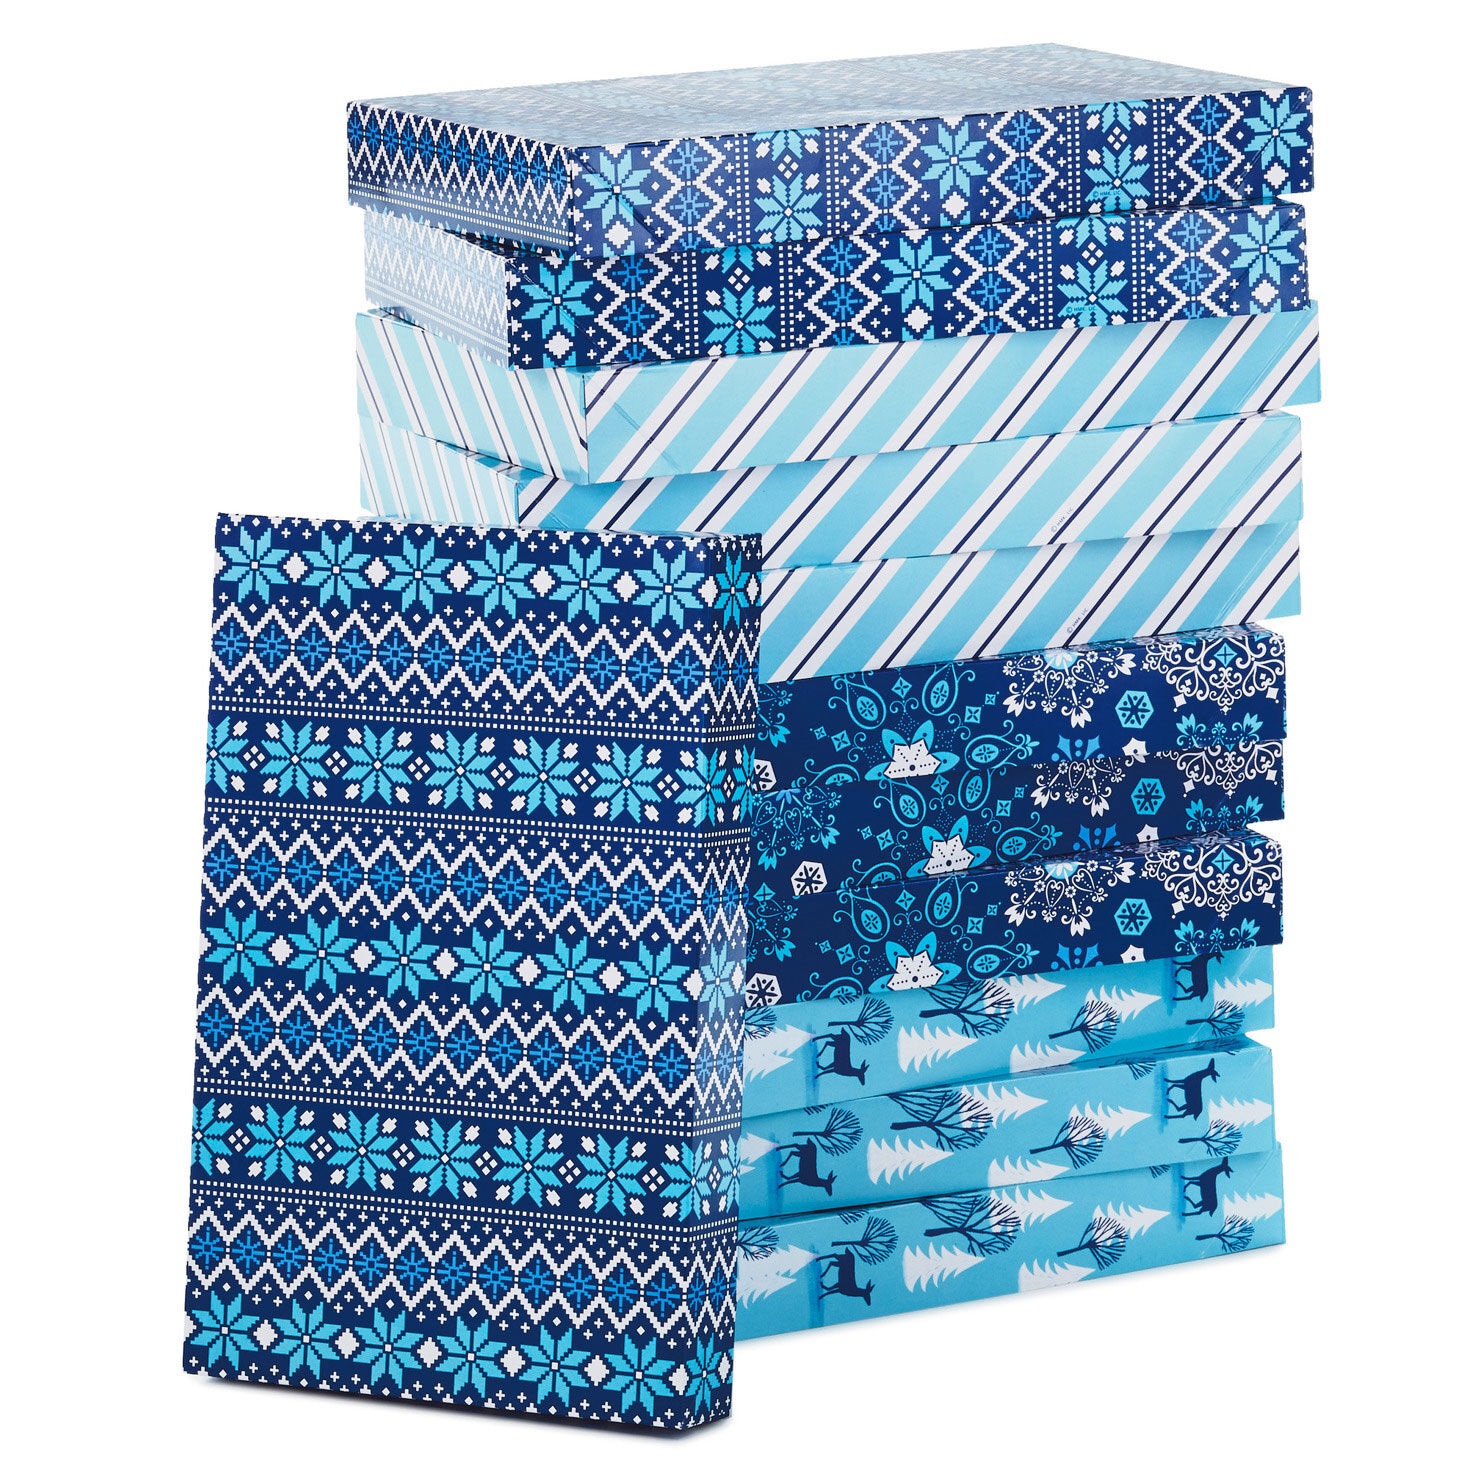 Hallmark Christmas Gift Box Assortment, Patterned Shirt Boxes with Lids, Set of 12